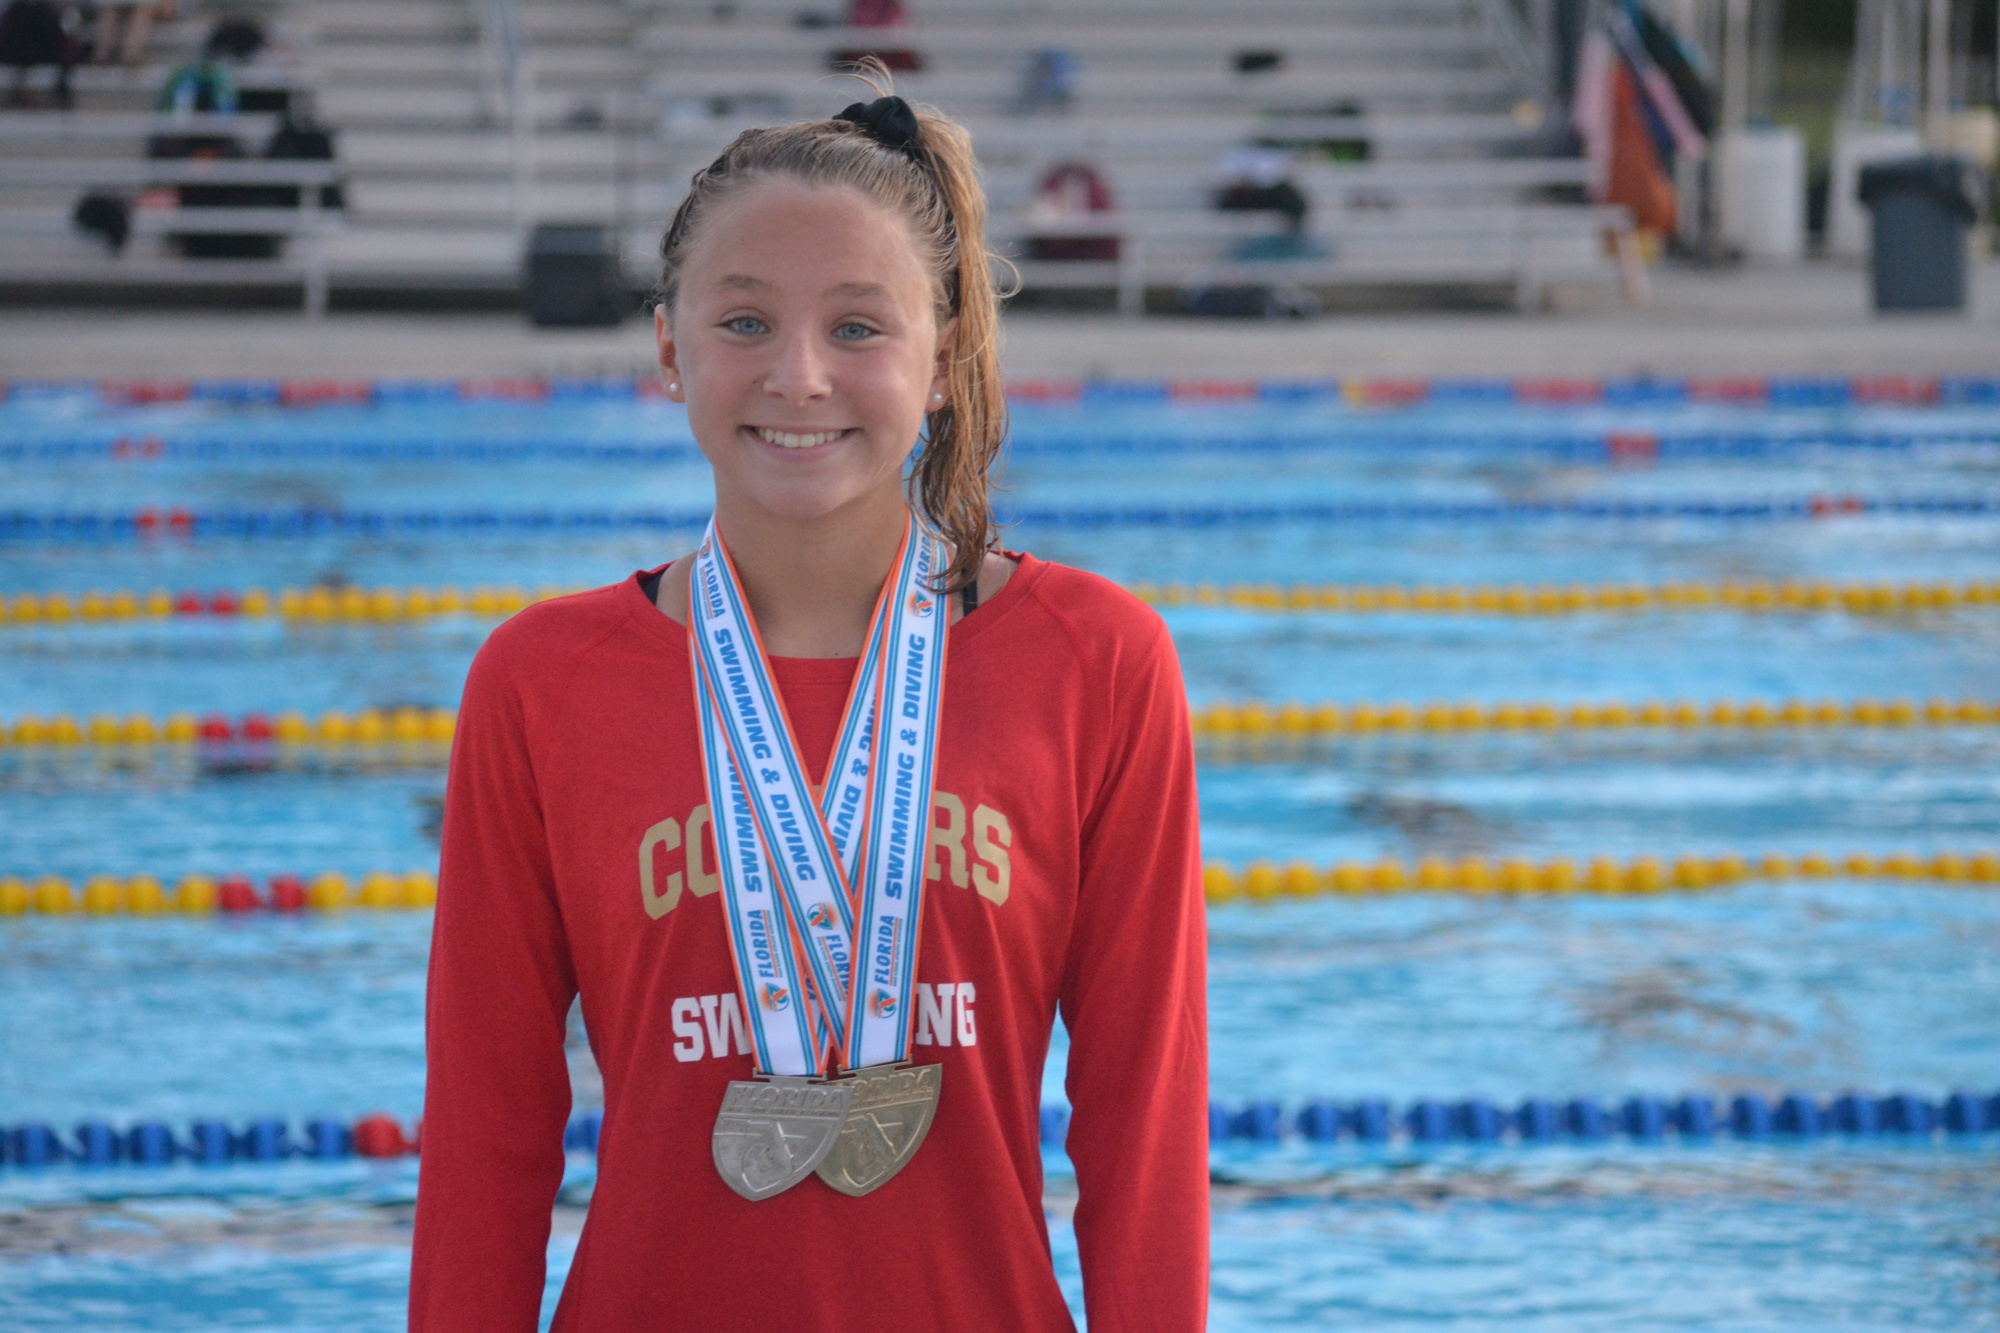 2. Cardinal Mooney freshman Michaela Mattes won gold and silver at the 2019 Class 1A state swimming championships.